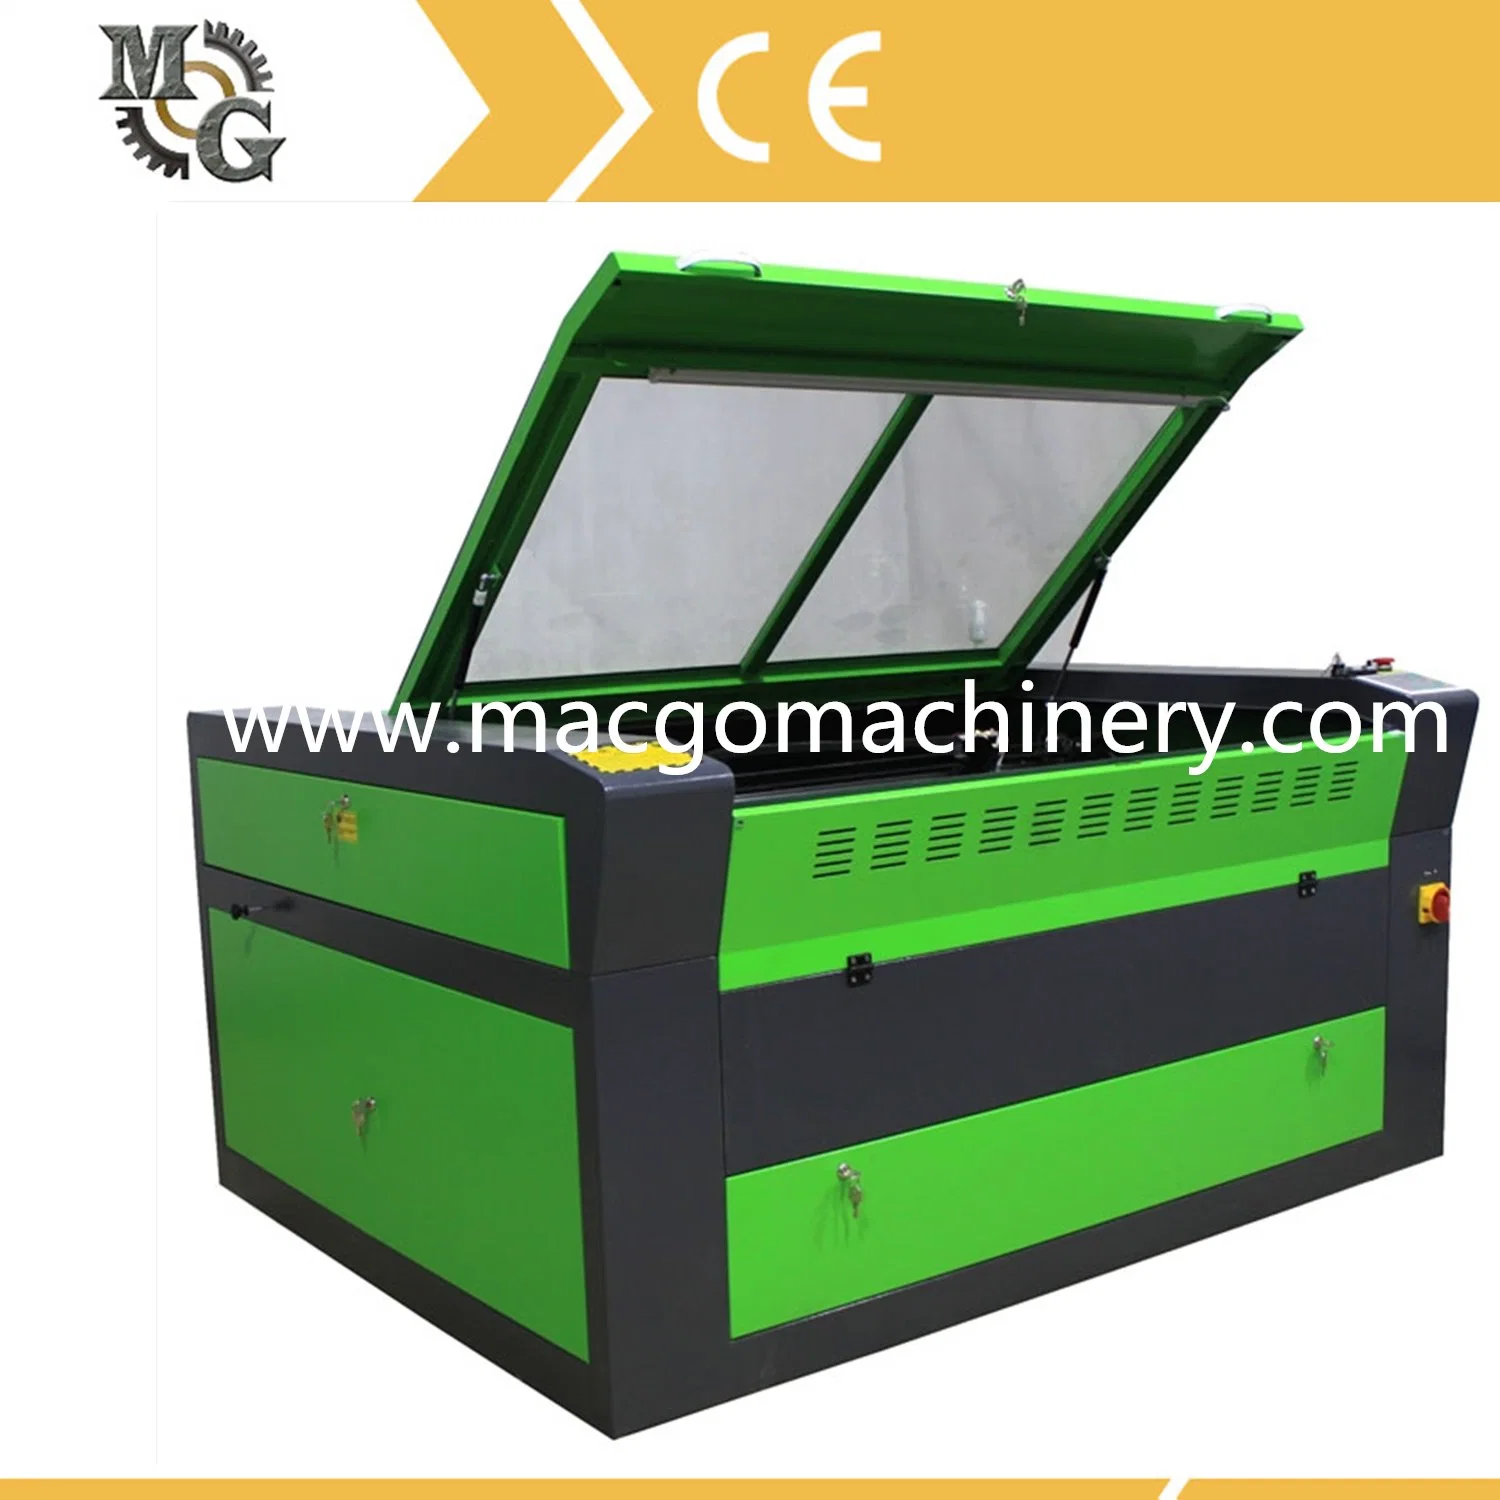 CNC Engraving Cutting Machine for Metal/Nonmental Material